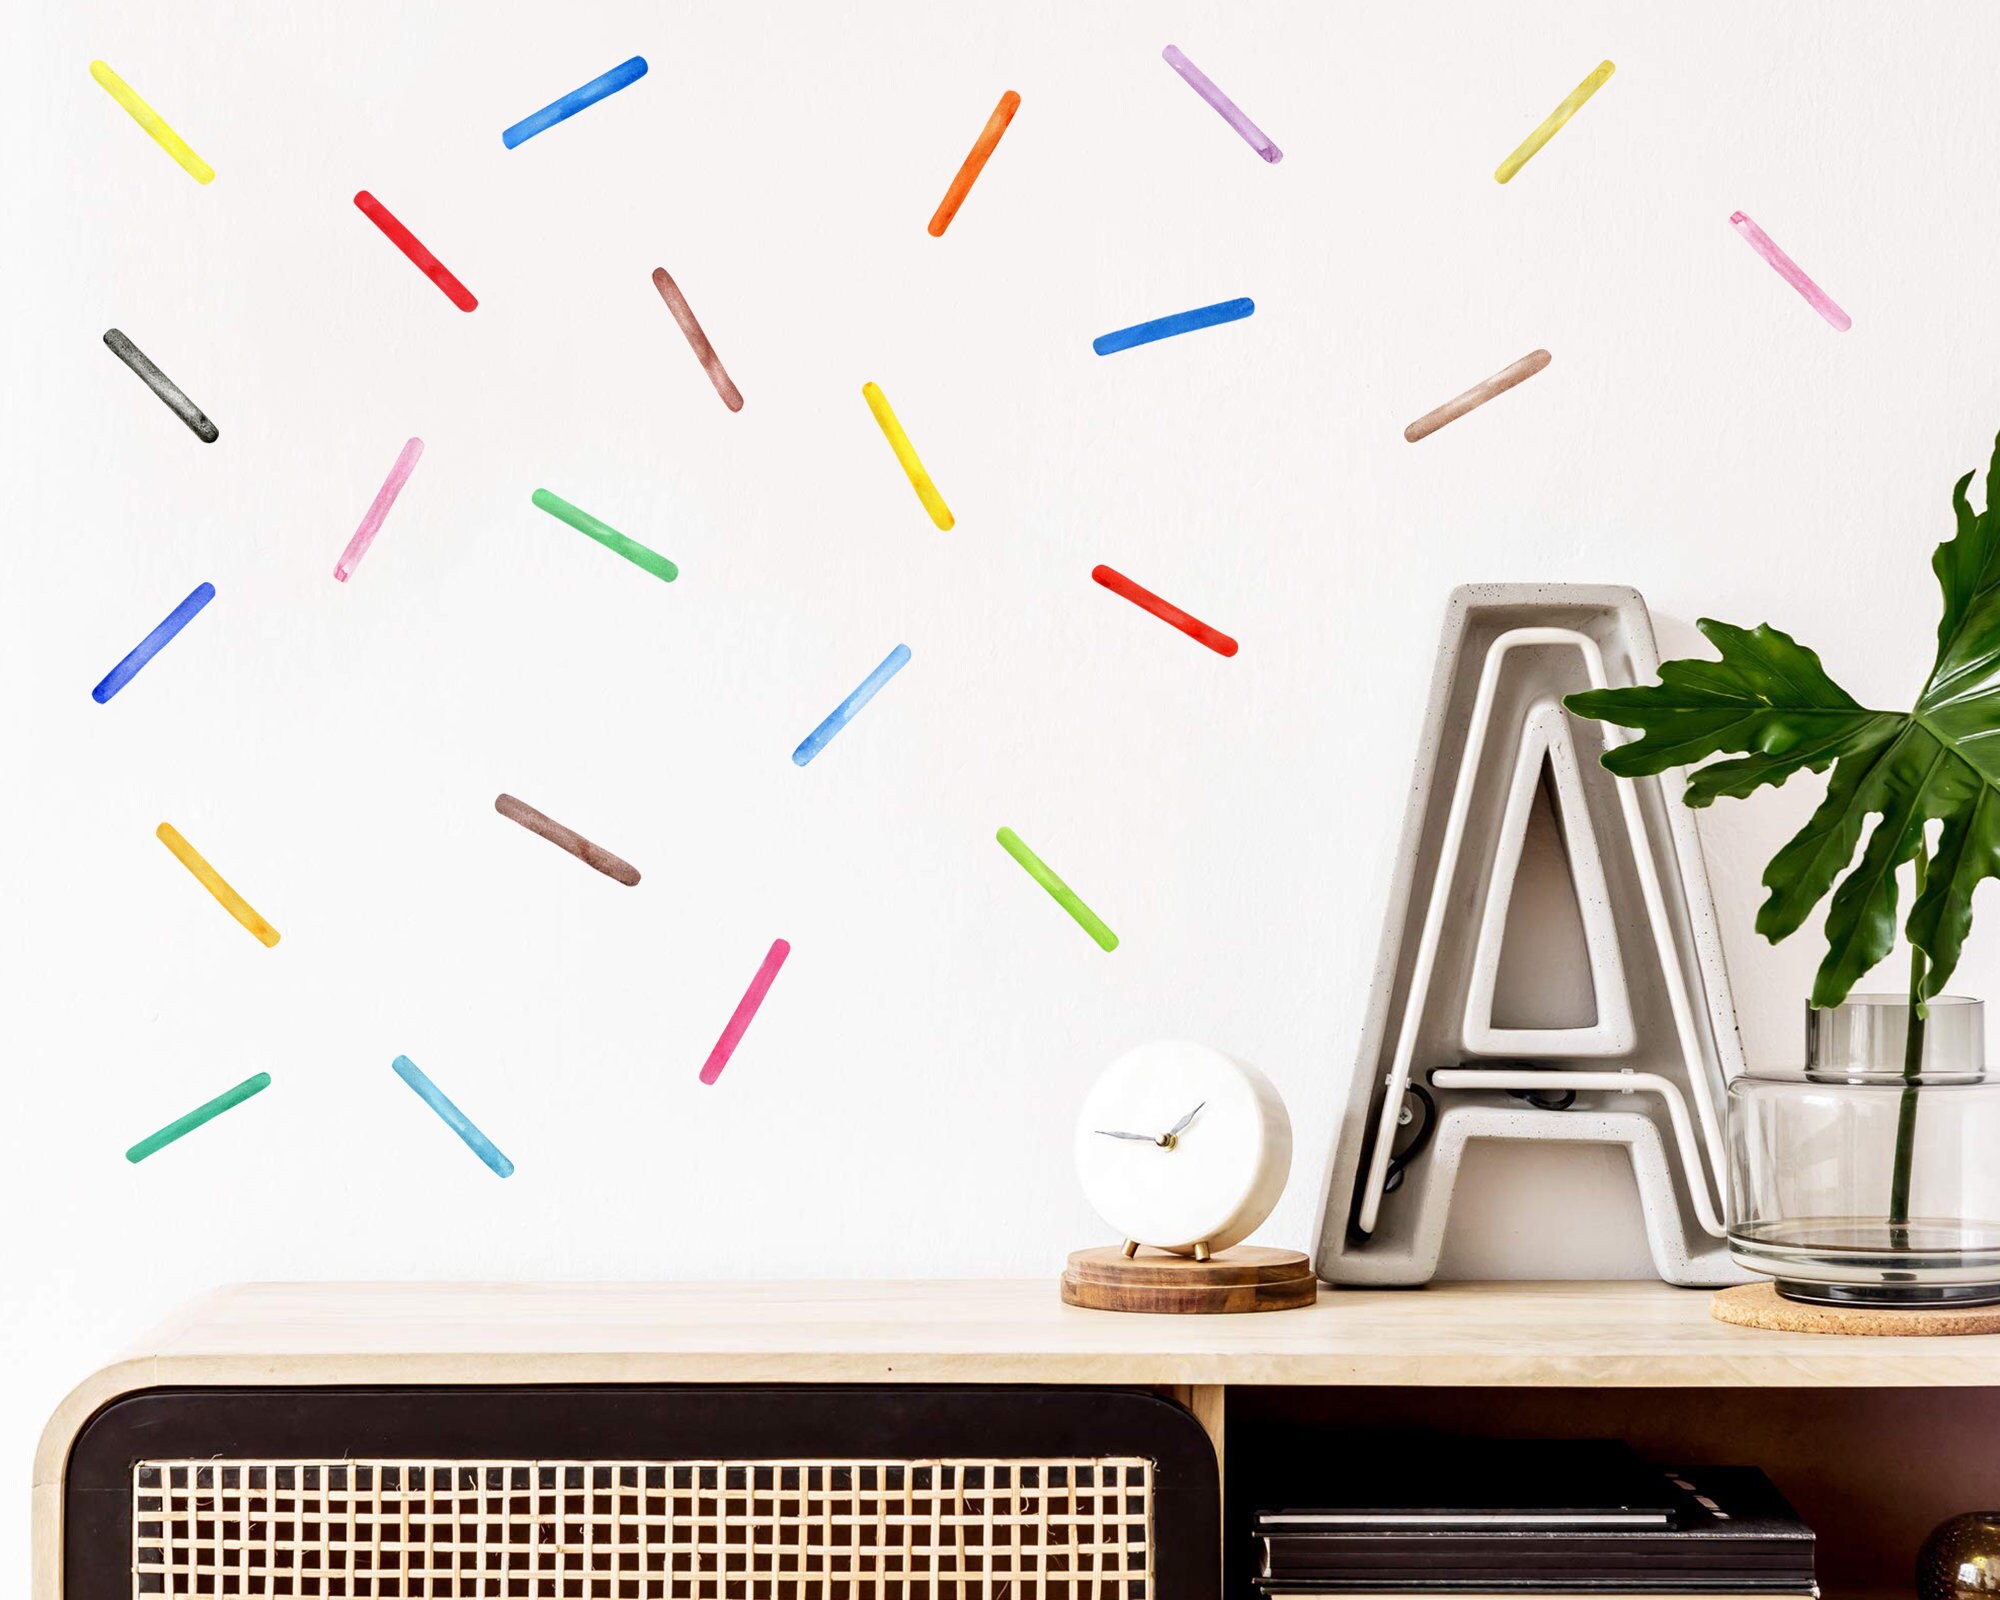 200 x Rainbow Colour Sprinkle Shaped Wall Stickers Decals:UK seller Free P&P